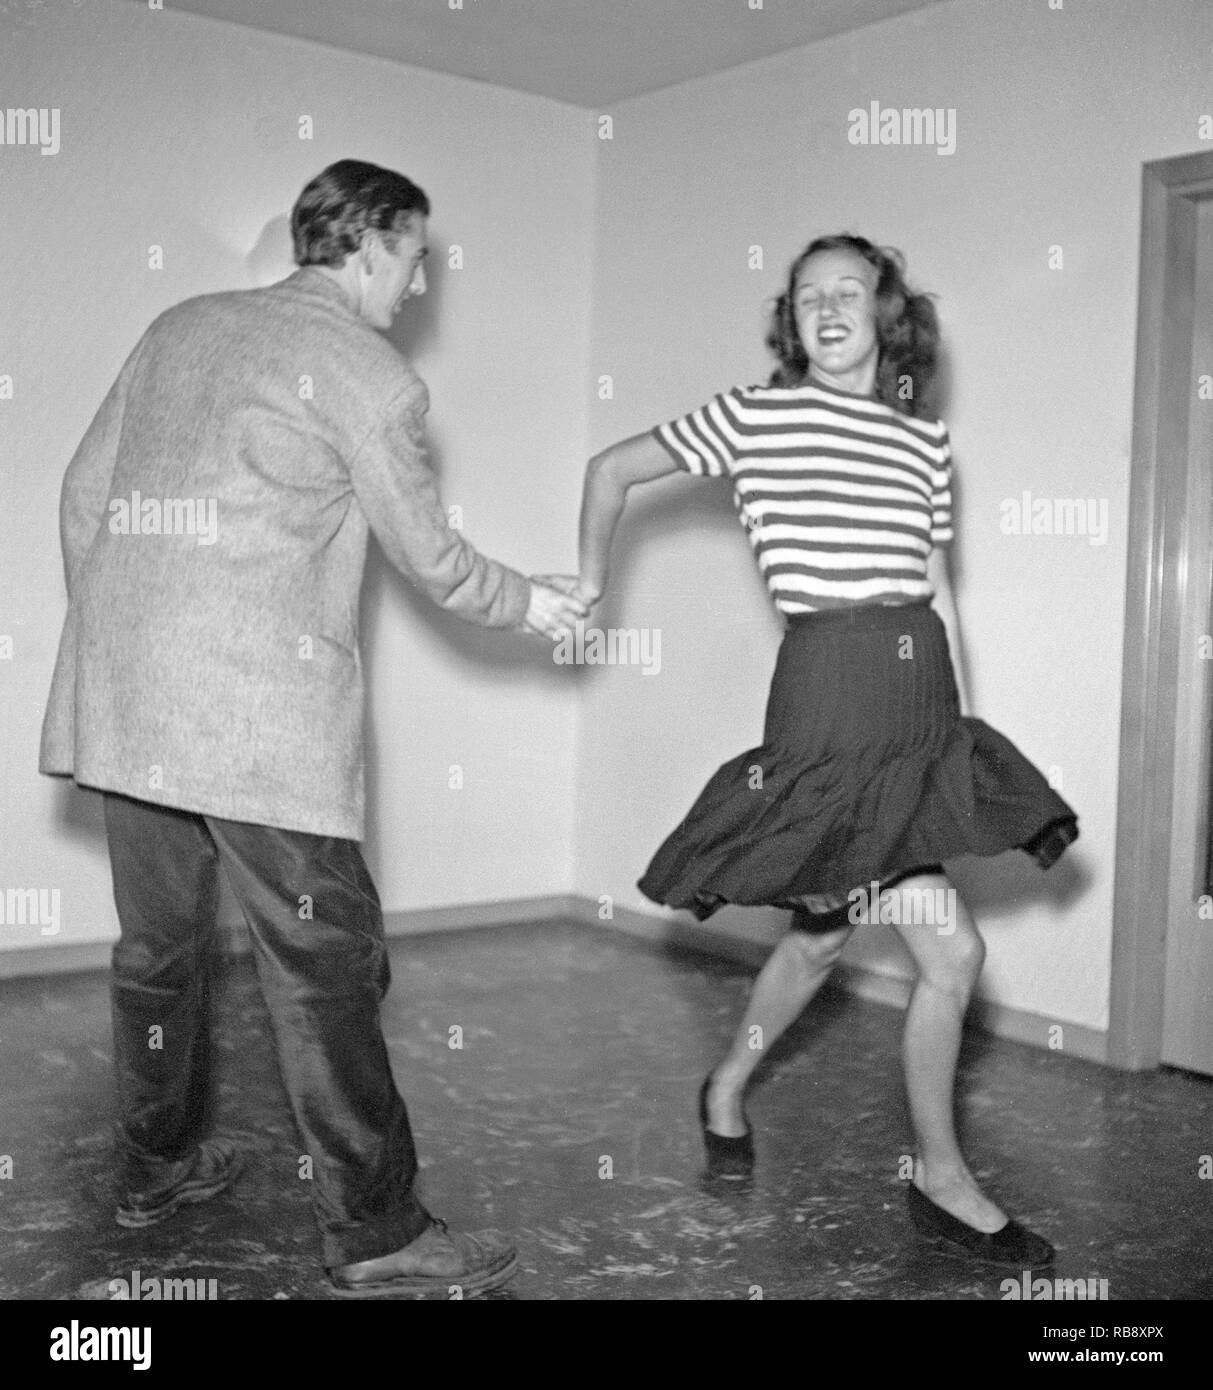 Jitterbug dance. A dance popularized in the United states and spread by American soldiers and sailors around the world during the Second world war. Pictured here Erik Danielsen and Miss Gunvor Johansson when dancing the Jitterbug dance 1944. Photo: Kristoffersson ref K100-2 Stock Photo